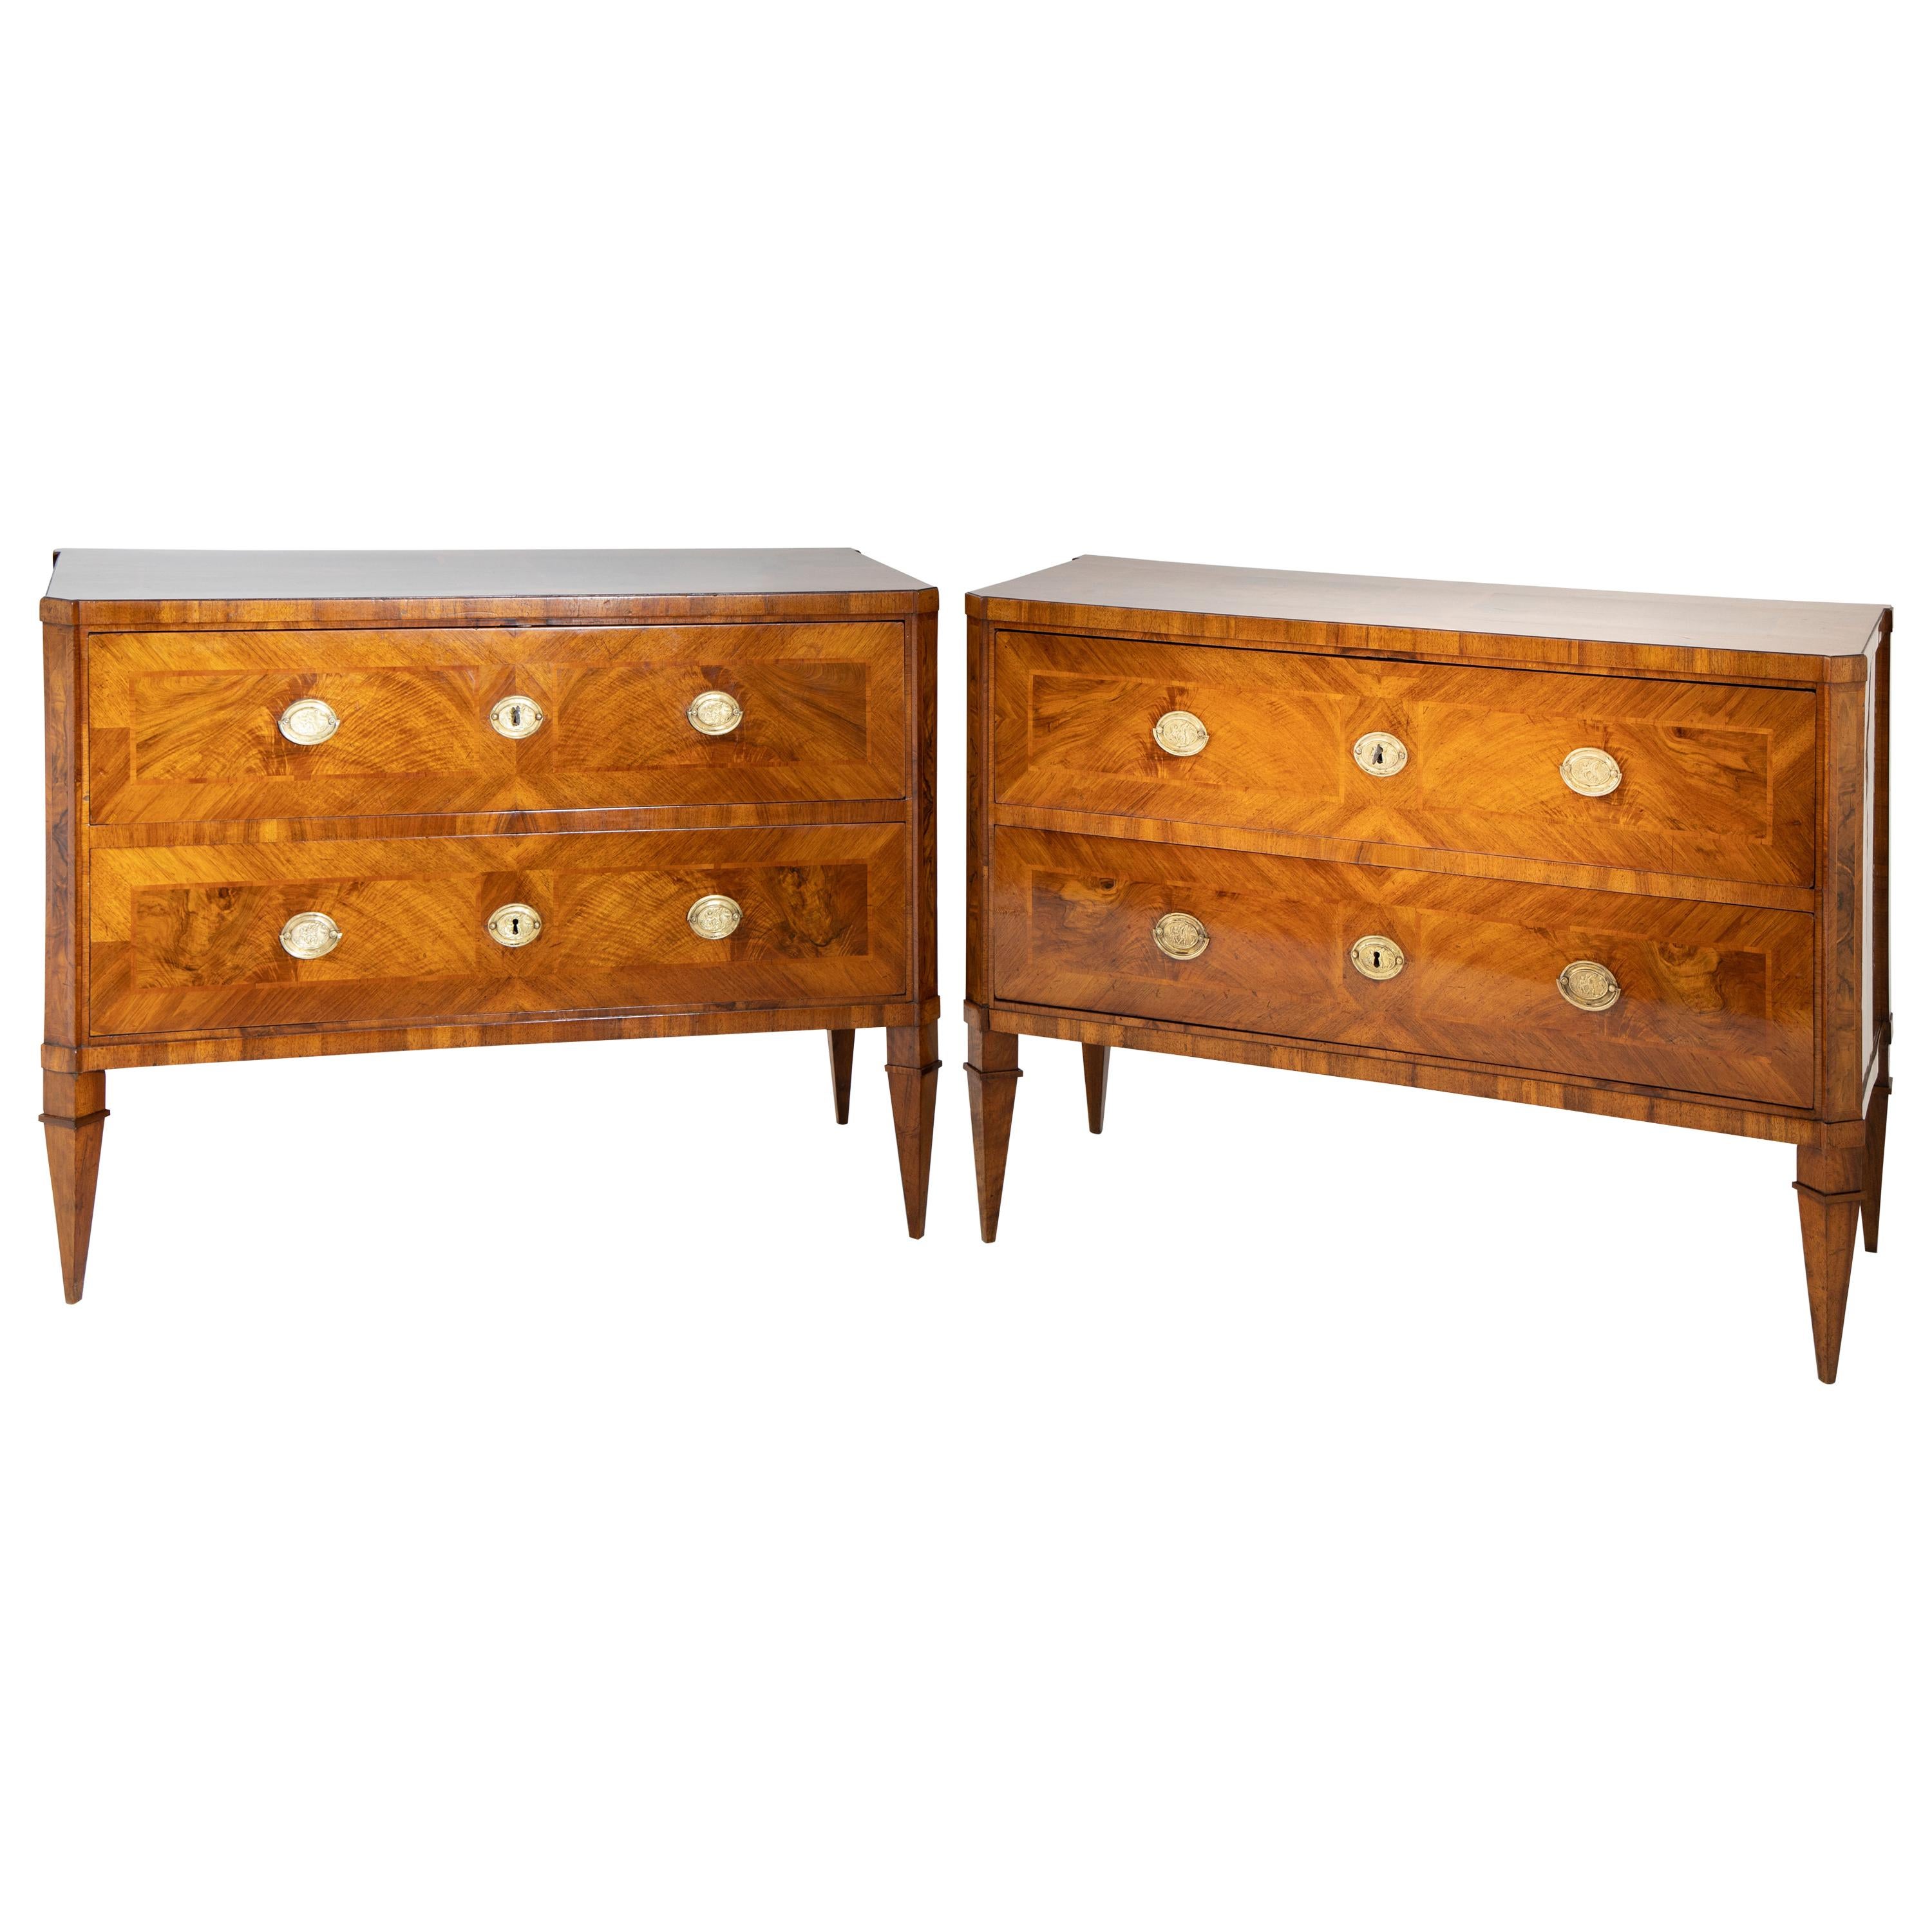 Pair of Neoclassical Chests